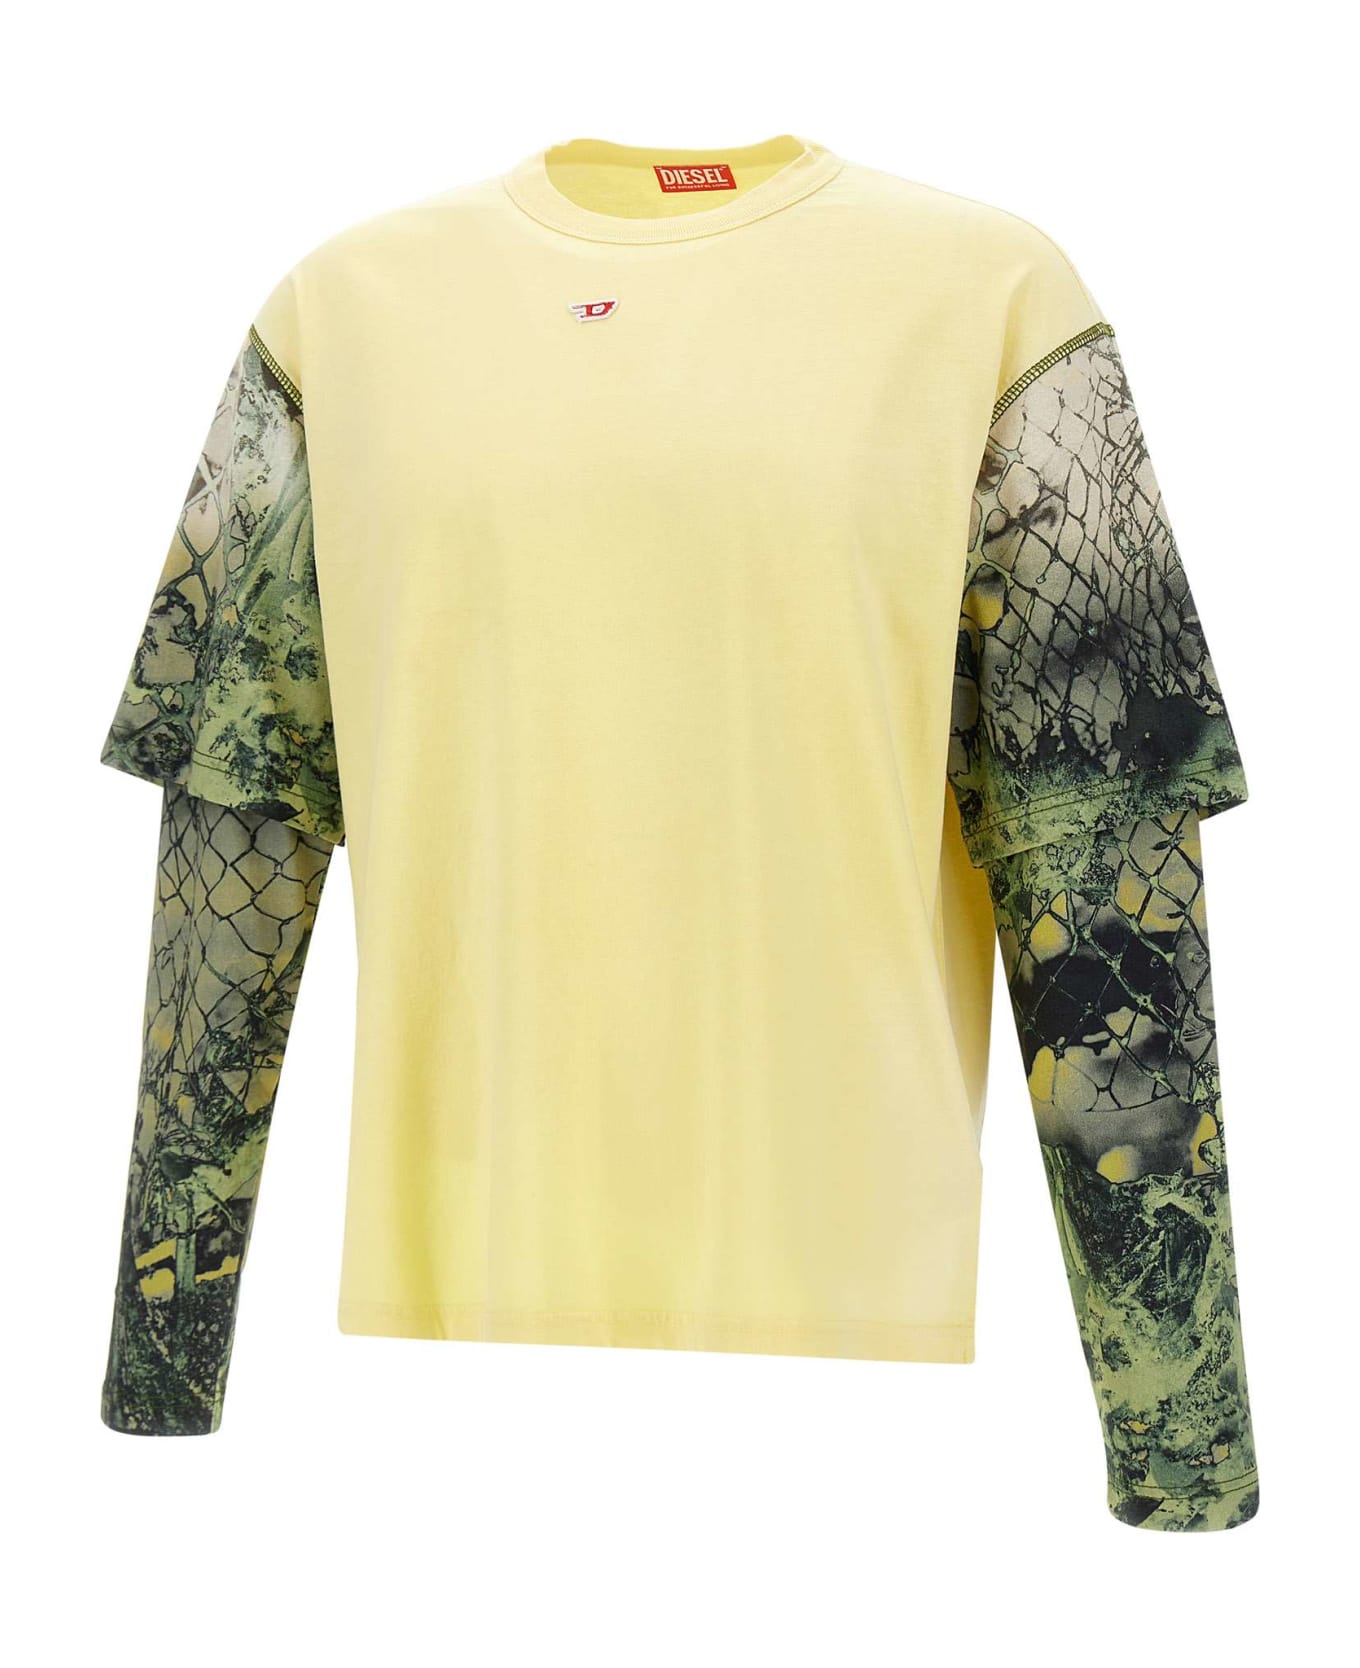 Diesel "t-wesher" Cotton Sweater - YELLOW